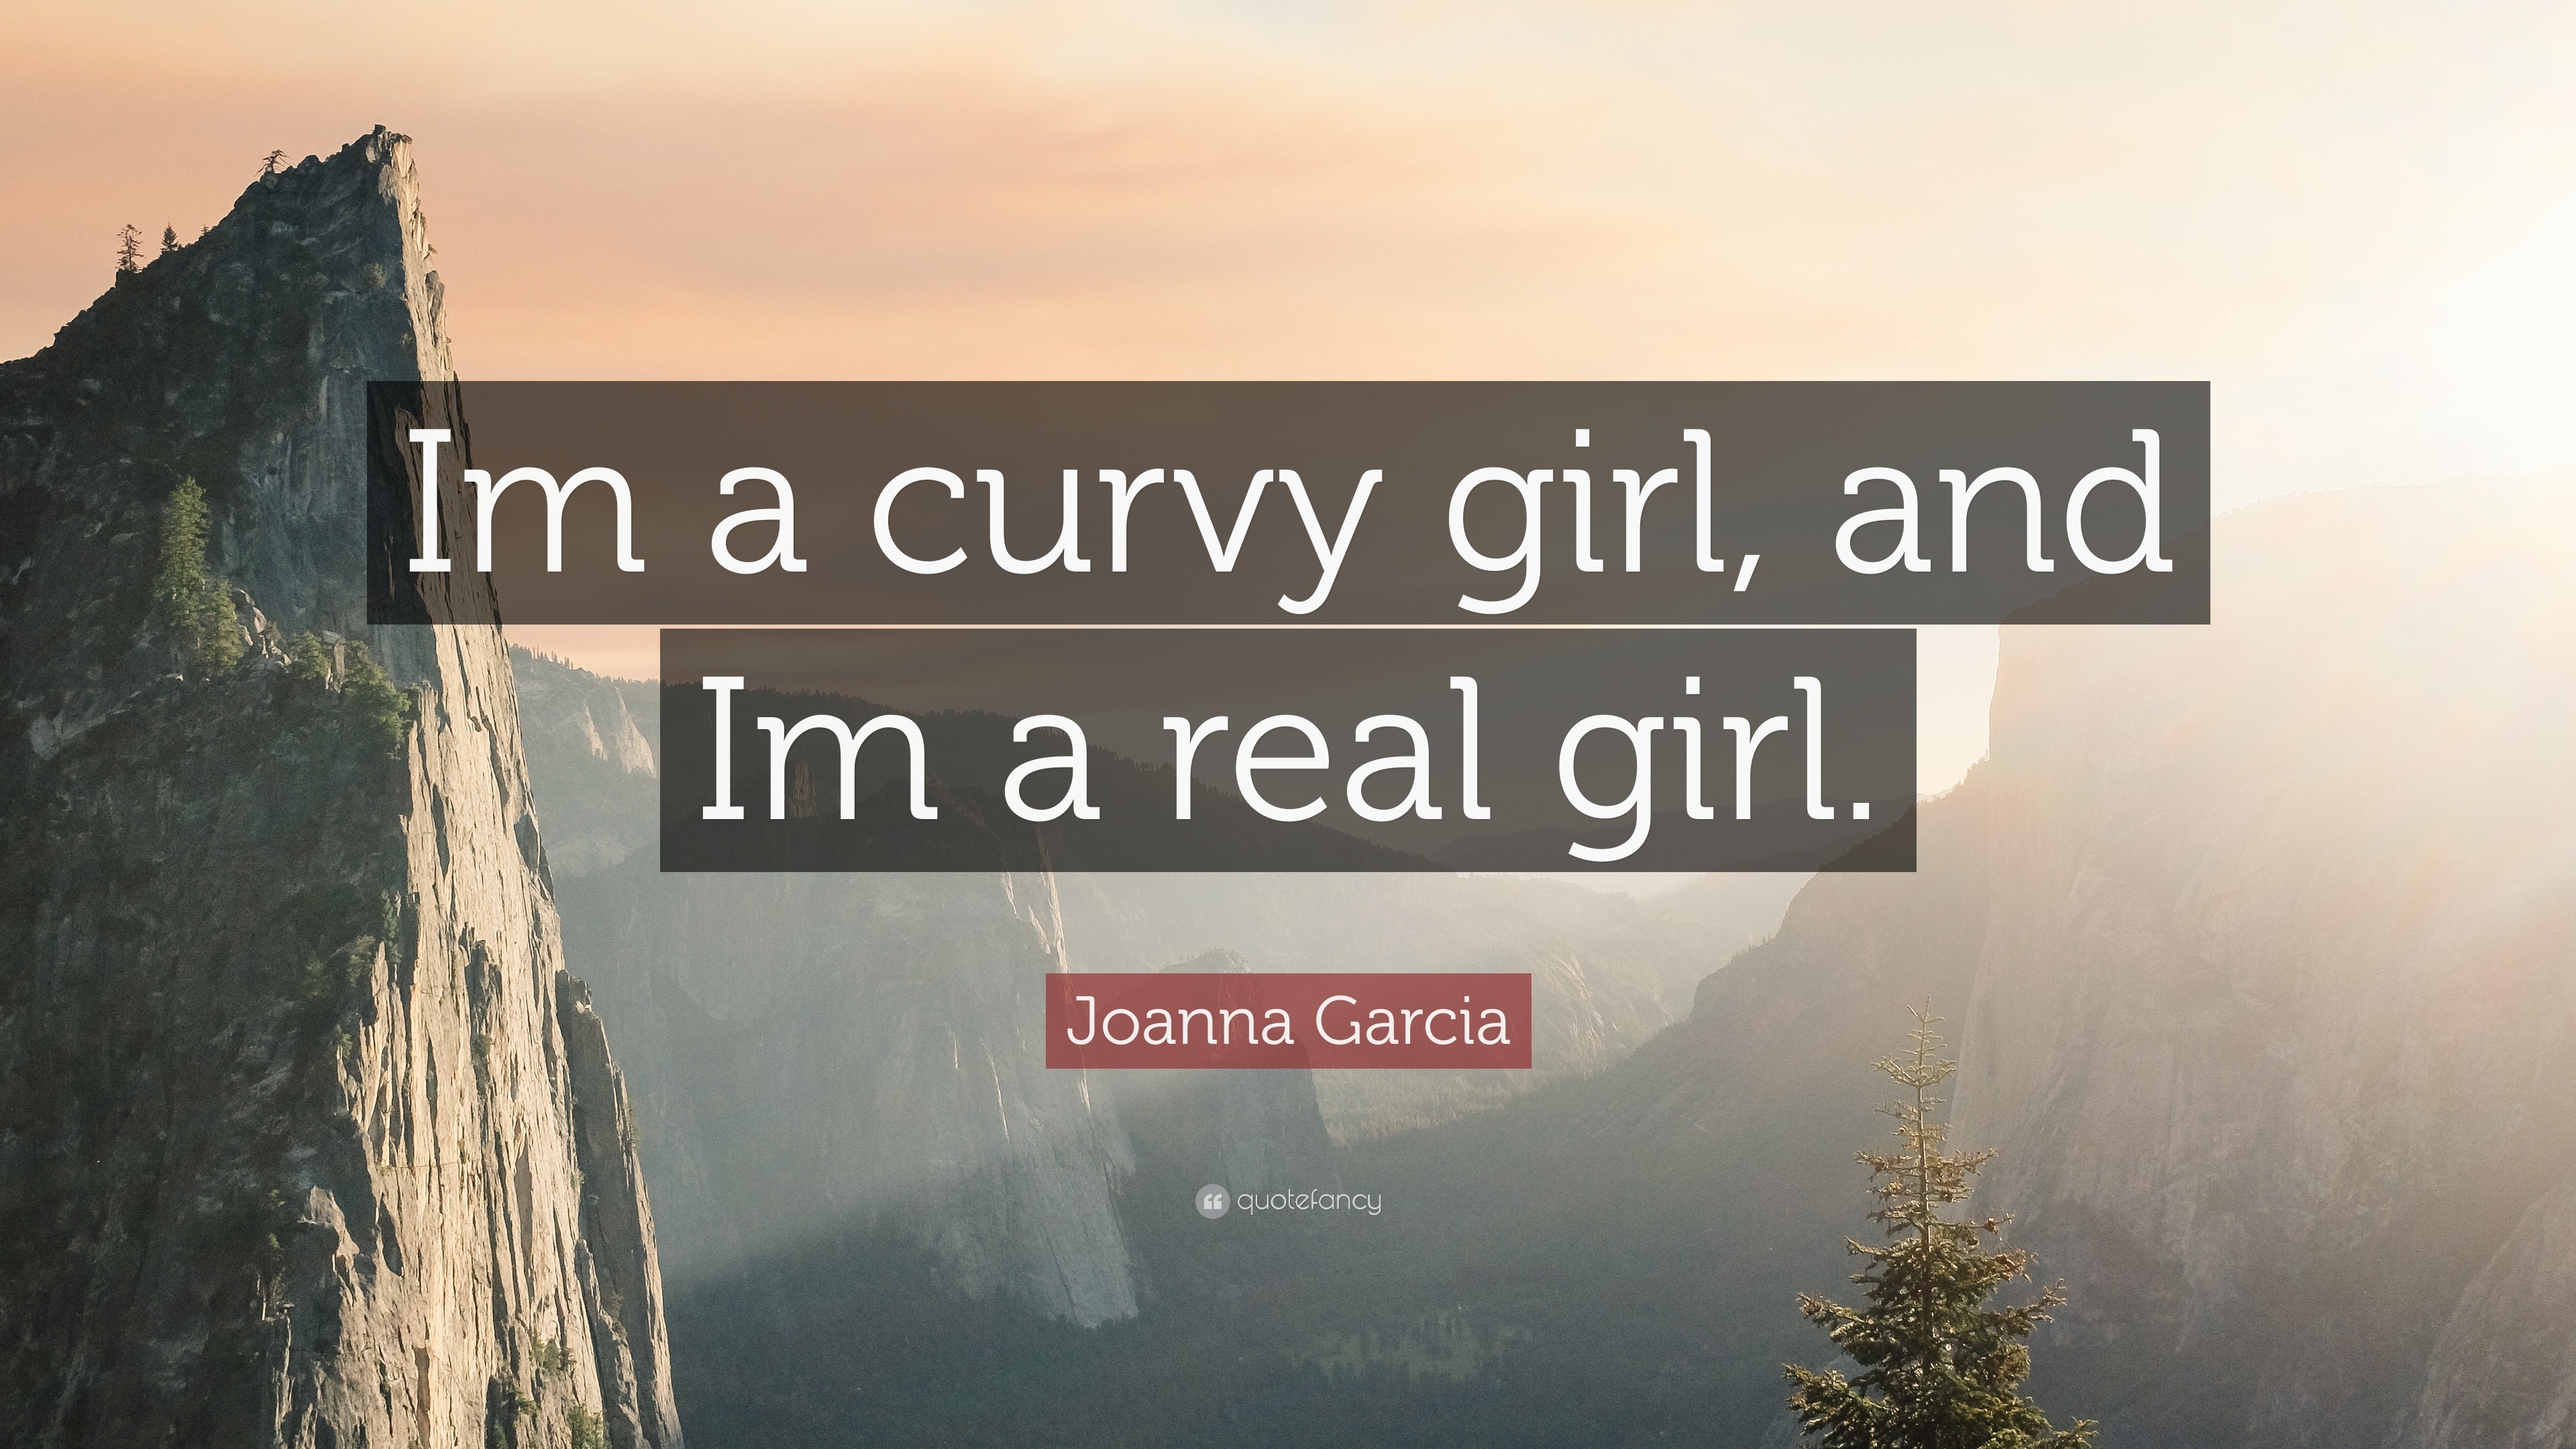 Joanna Garcia Quote: “Im a curvy girl, and Im a real girl.”